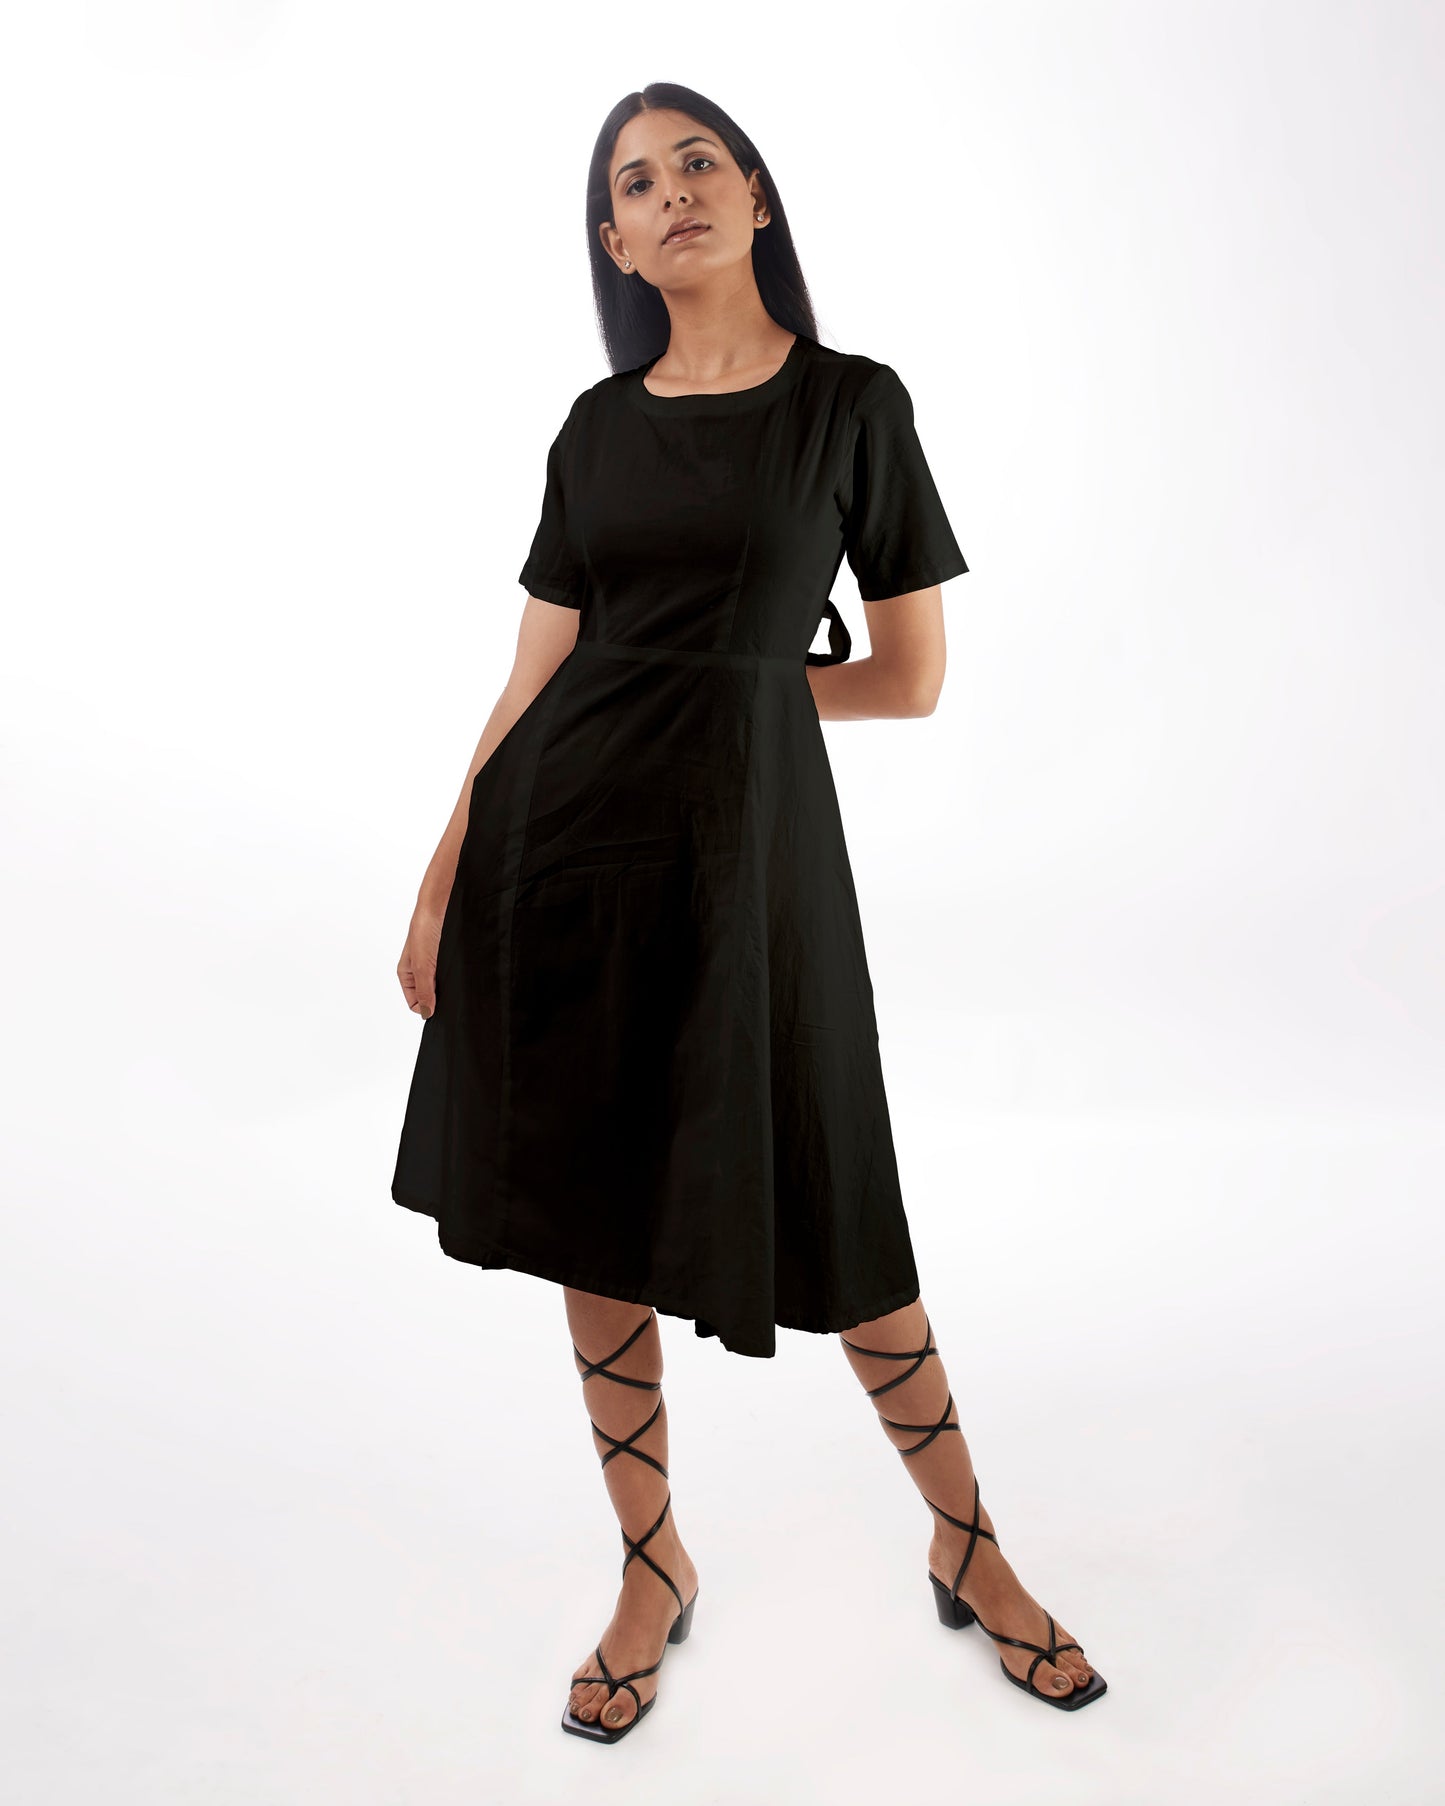 Black Backless Midi Dress by Kamakhyaa with 100% pure cotton, Black, FB ADS JUNE, Fitted At Waist, KKYSS, Midi Dresses, Naturally Made, Party Wear, Slim Fit, Solids, Summer Sutra, Womenswear at Kamakhyaa for sustainable fashion